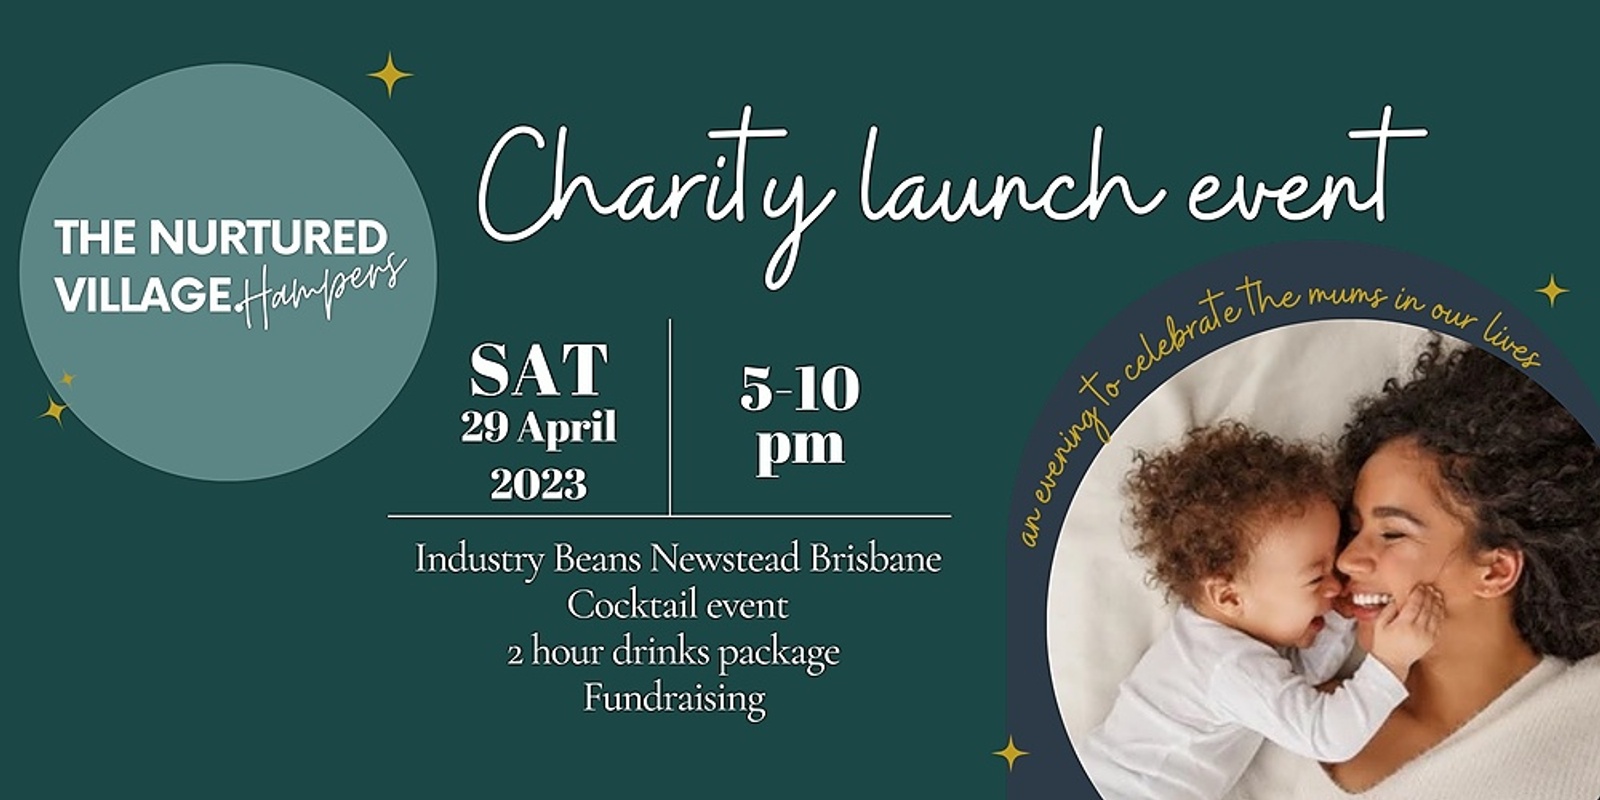 Banner image for THE NURTURED VILLAGE HAMPERS CHARITY LAUNCH EVENT